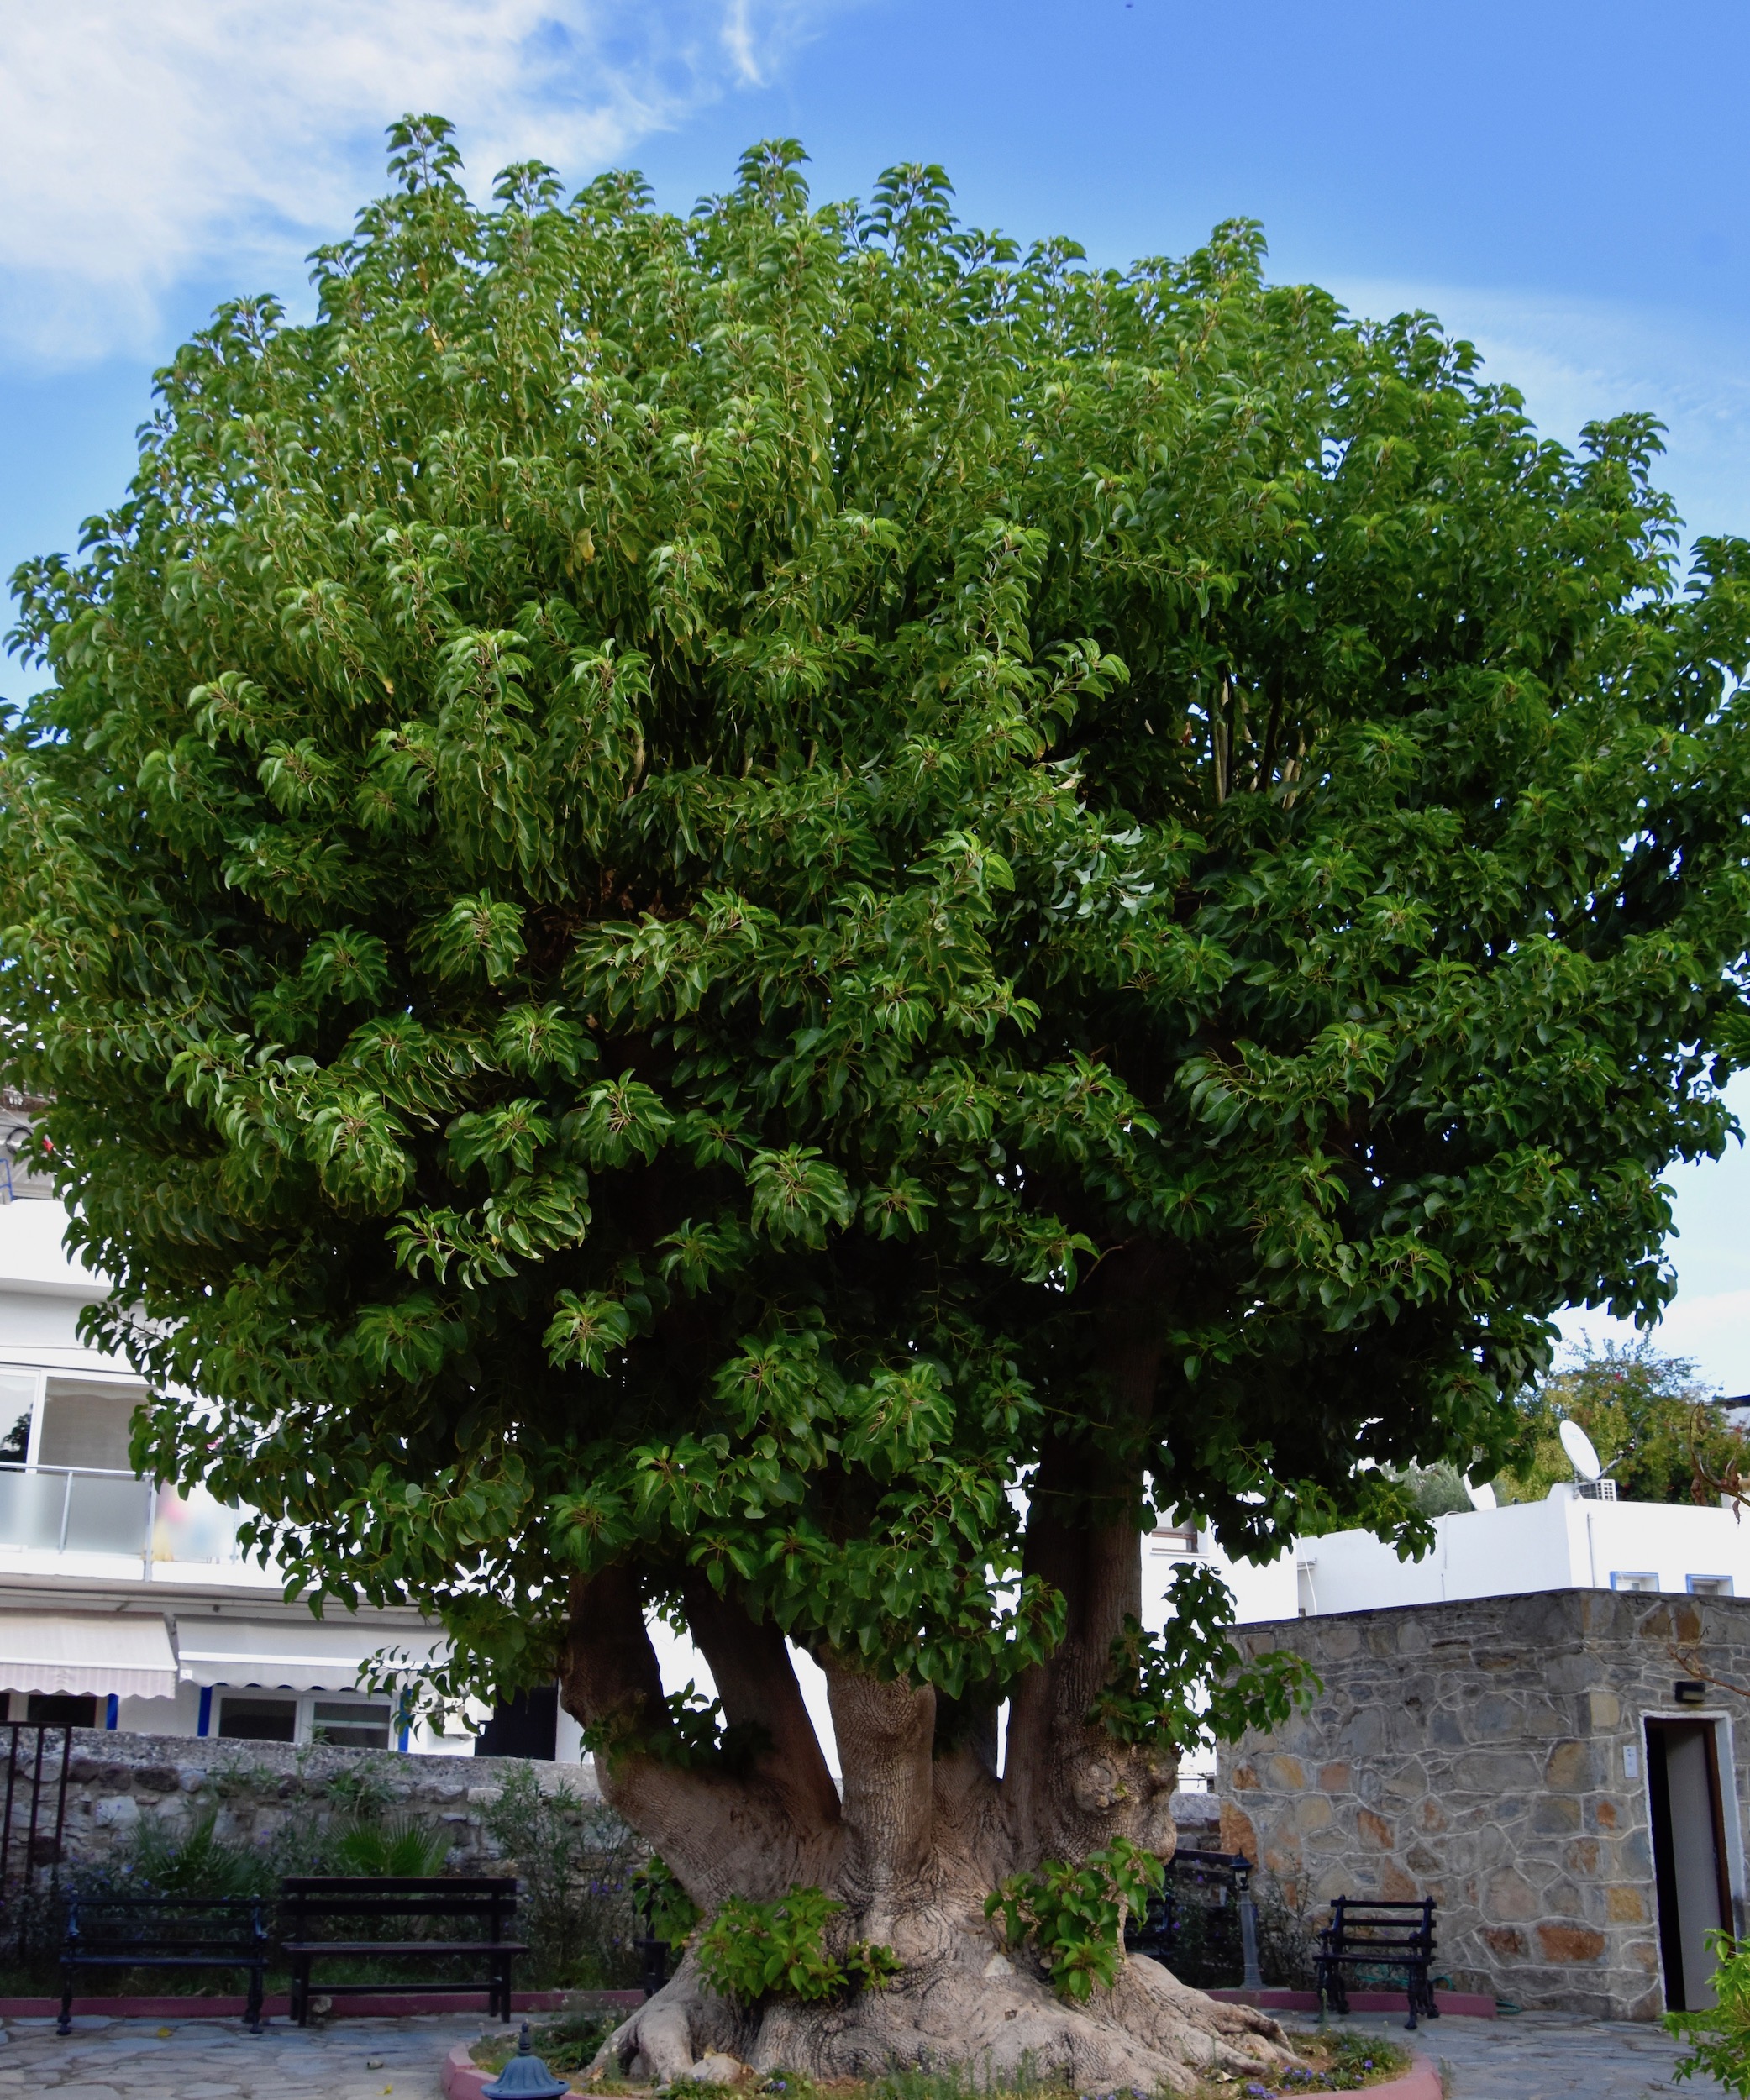 Six-Trunk Tree at the Mausoleum, Bodrum